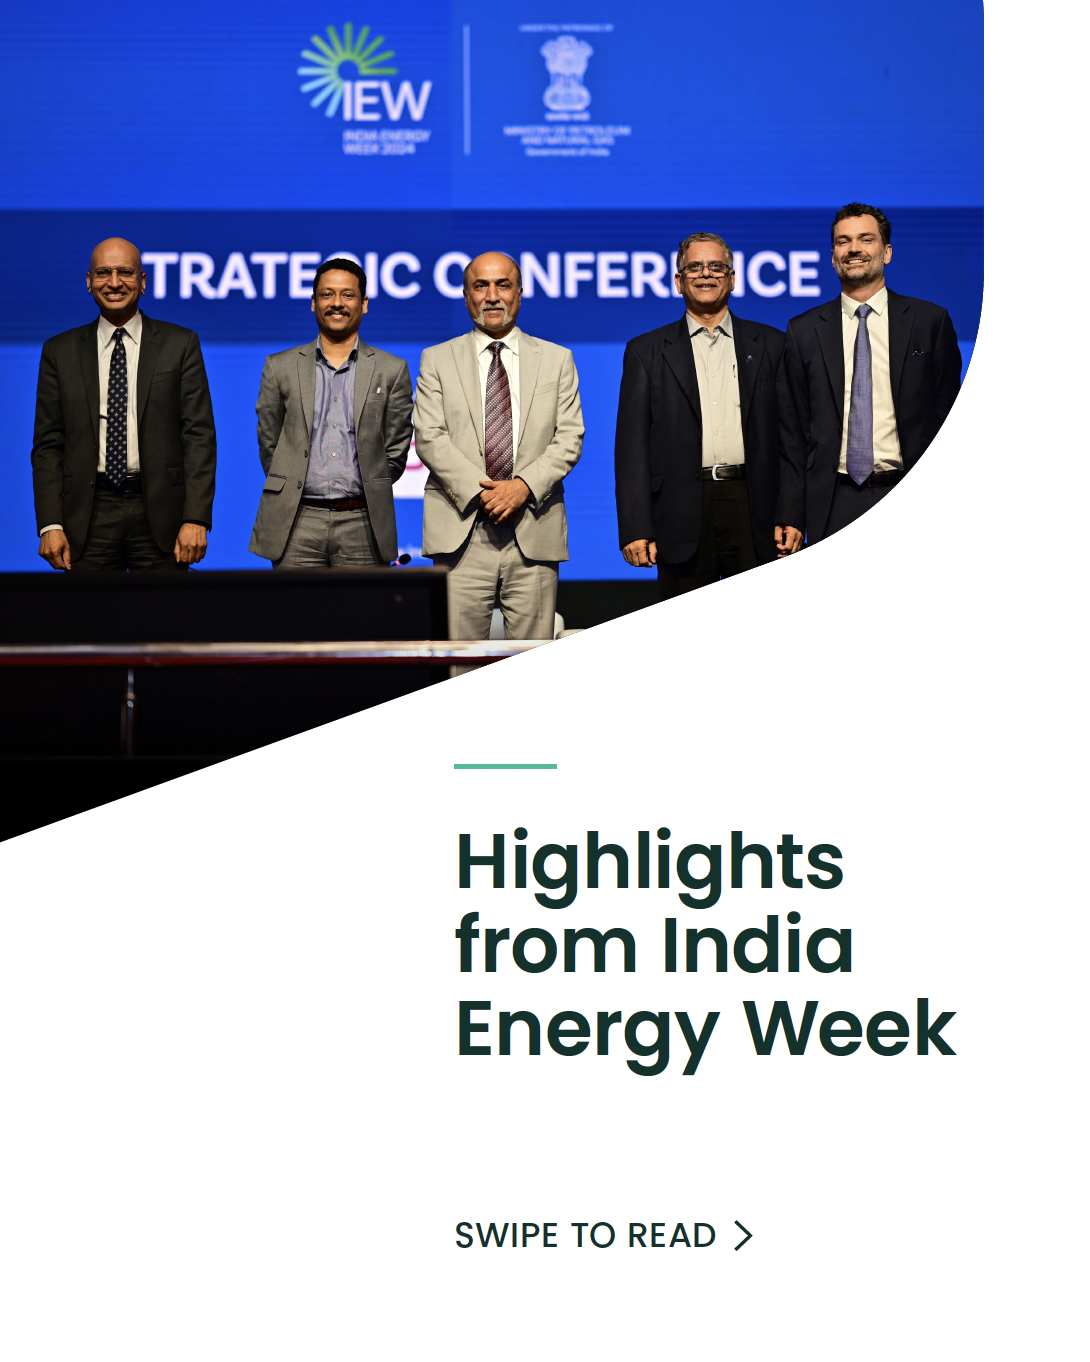 a group of people stood in a line on stage with the text "Highlights from India Energy Week"